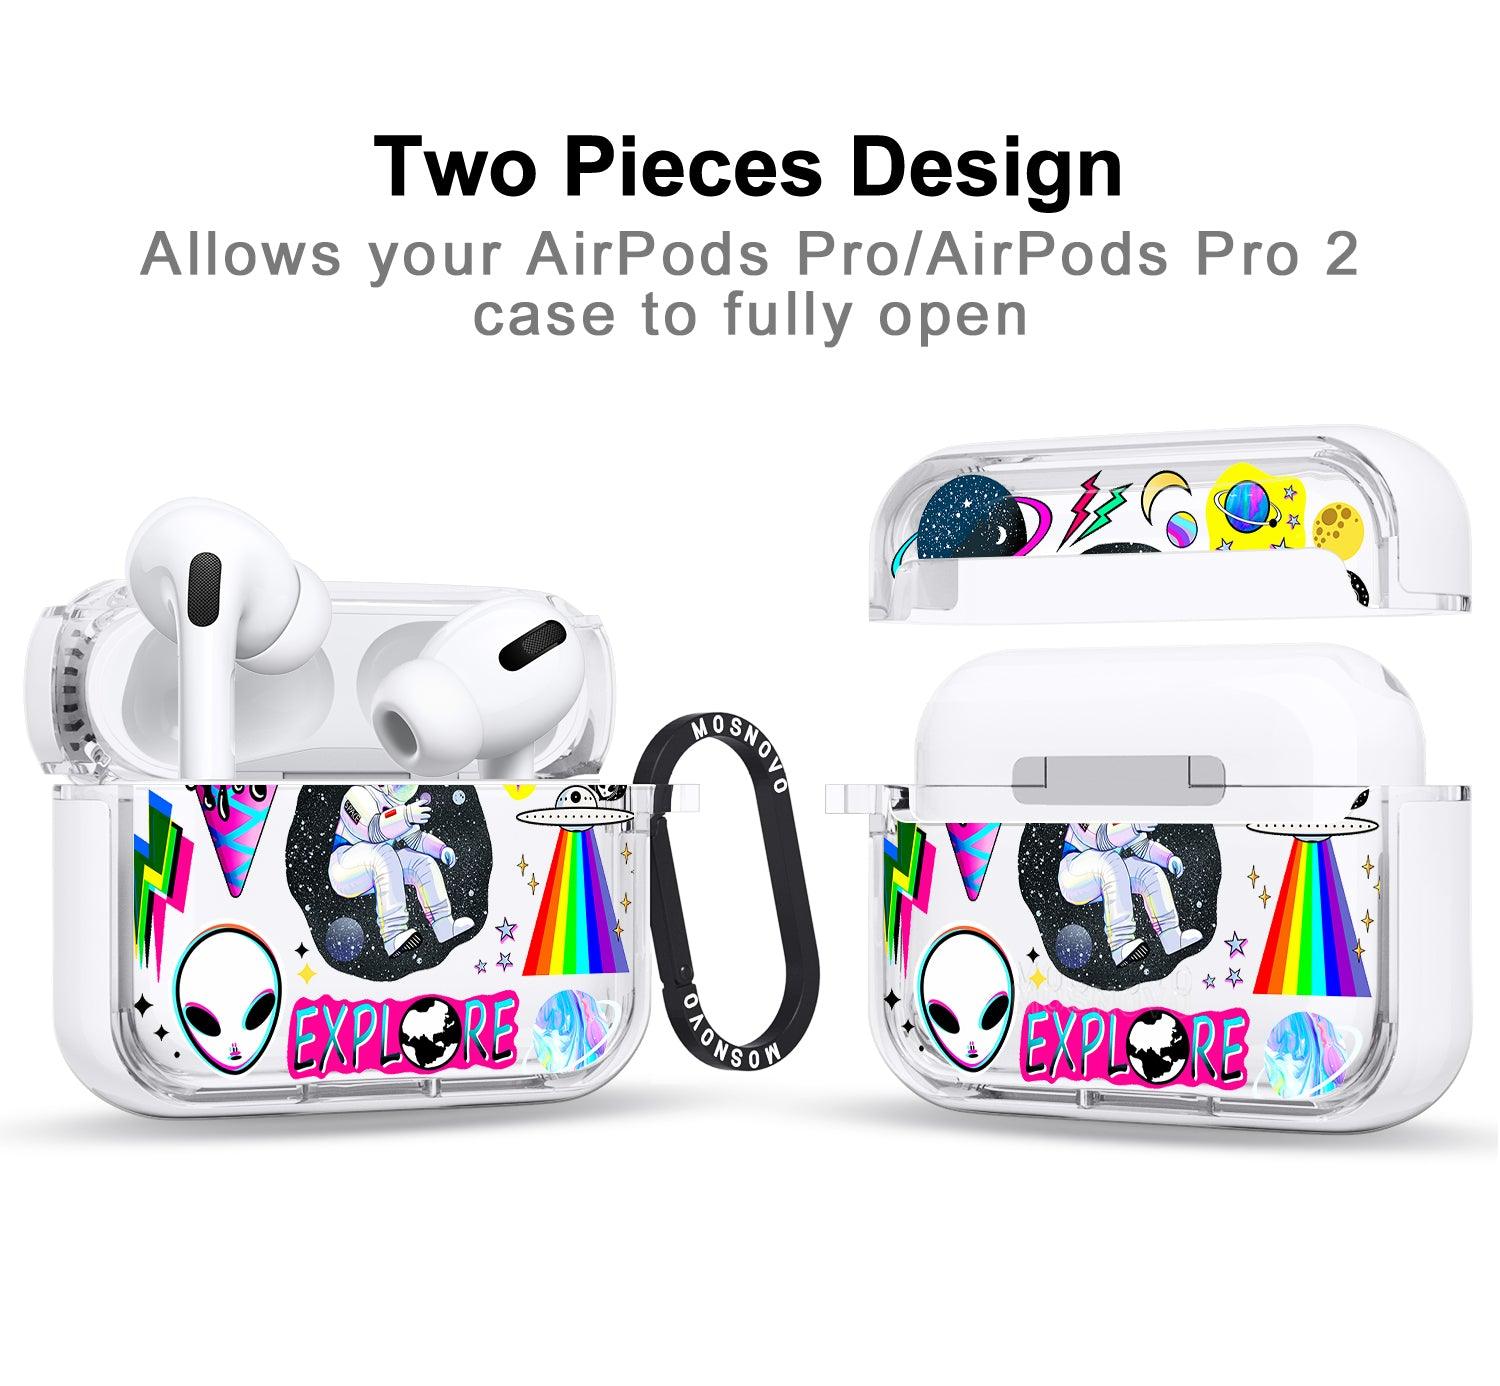 Sci-Fi Stickers AirPods Pro 2 Case (2nd Generation) - MOSNOVO